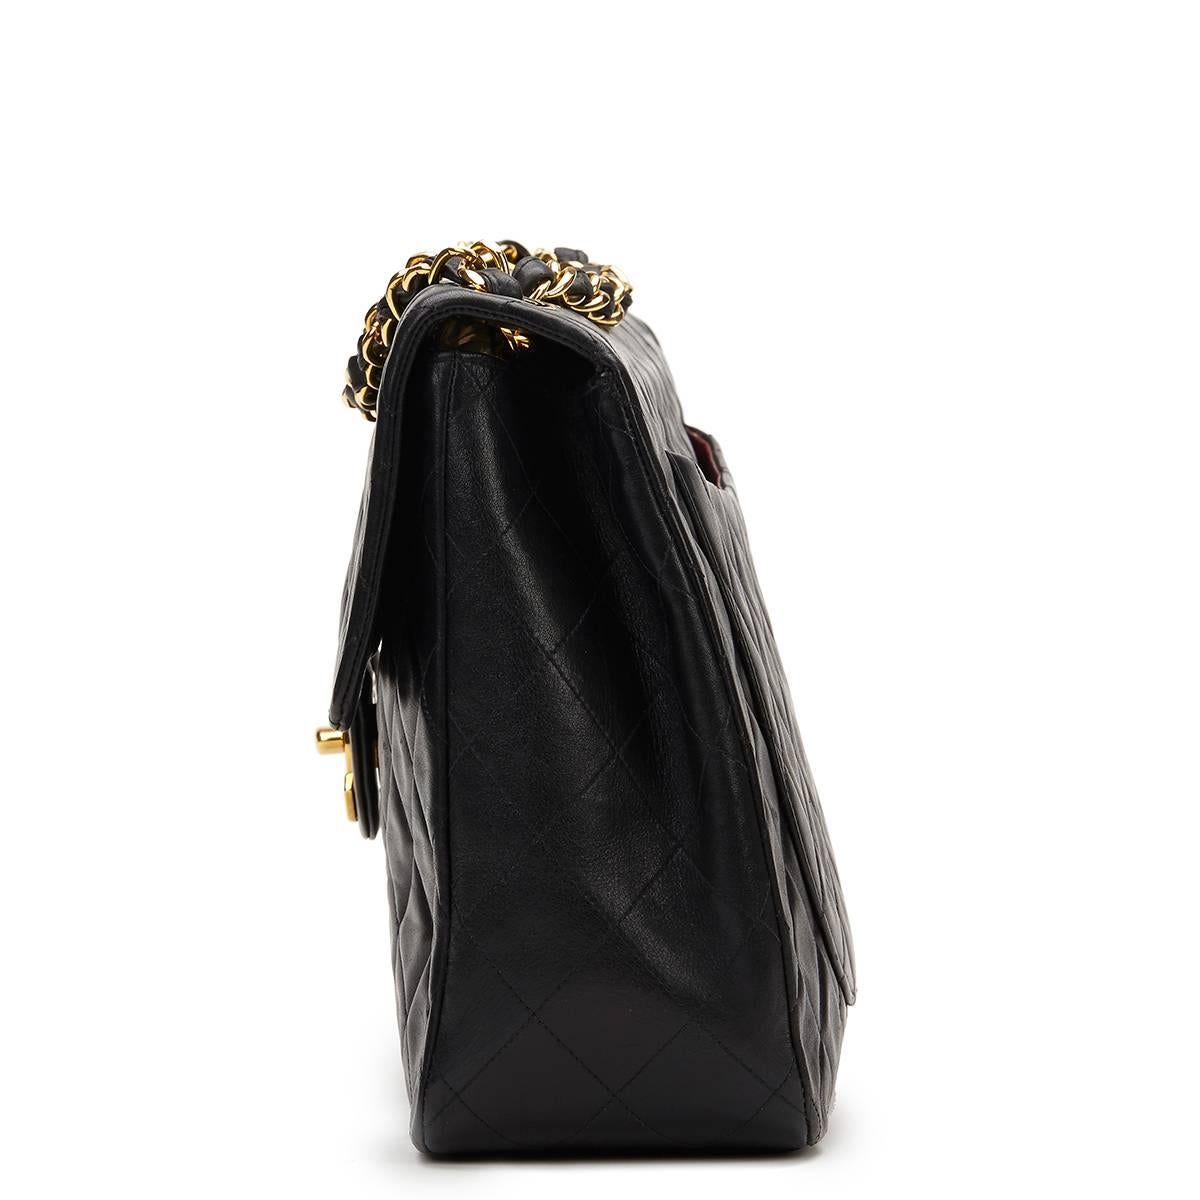 CHANEL
Black Quilted Lambskin Vintage Maxi Jumbo XL Flap Bag

This CHANEL Maxi Jumbo XL Flap Bag is in Excellent Pre-Owned Condition accompanied by Chanel Dust Bag. Circa 1994. Primarily made from Lambskin Leather complimented by Gold hardware. Our 